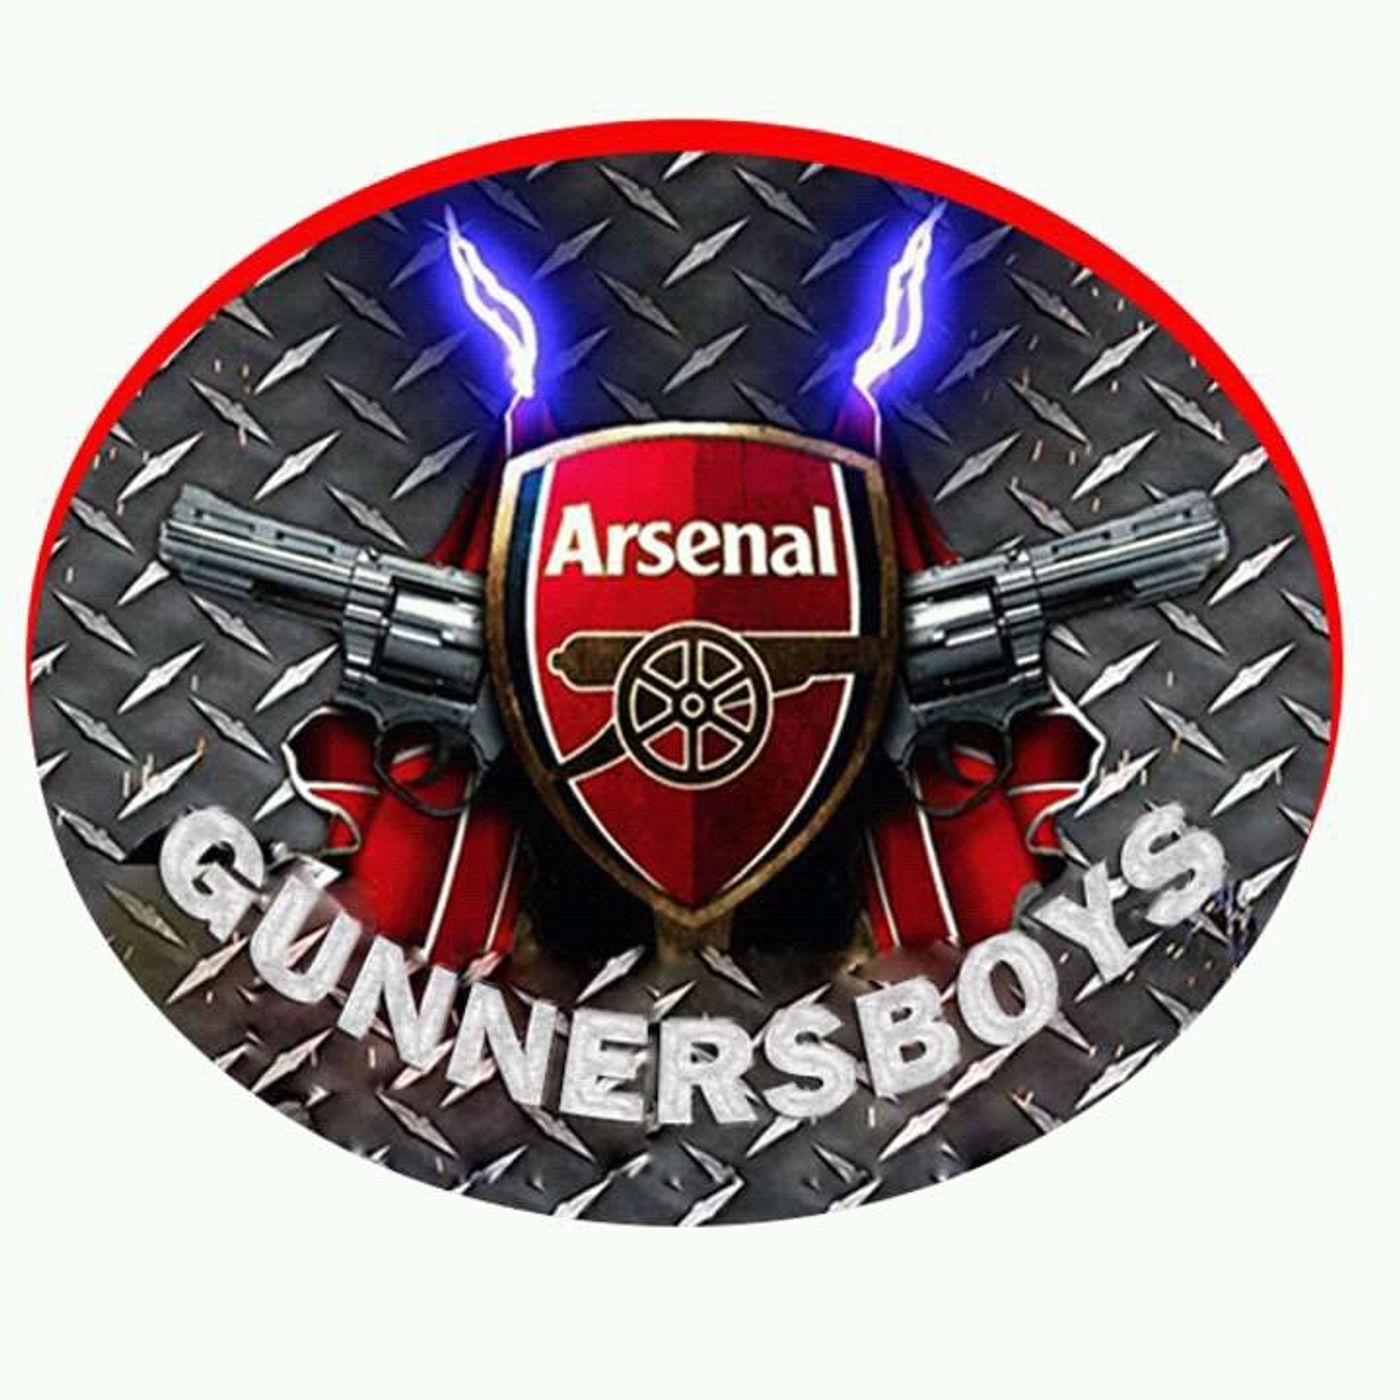 GUNNERS BOYS is best known for his  rants  put the camera in front of me i will talk arsenal all my